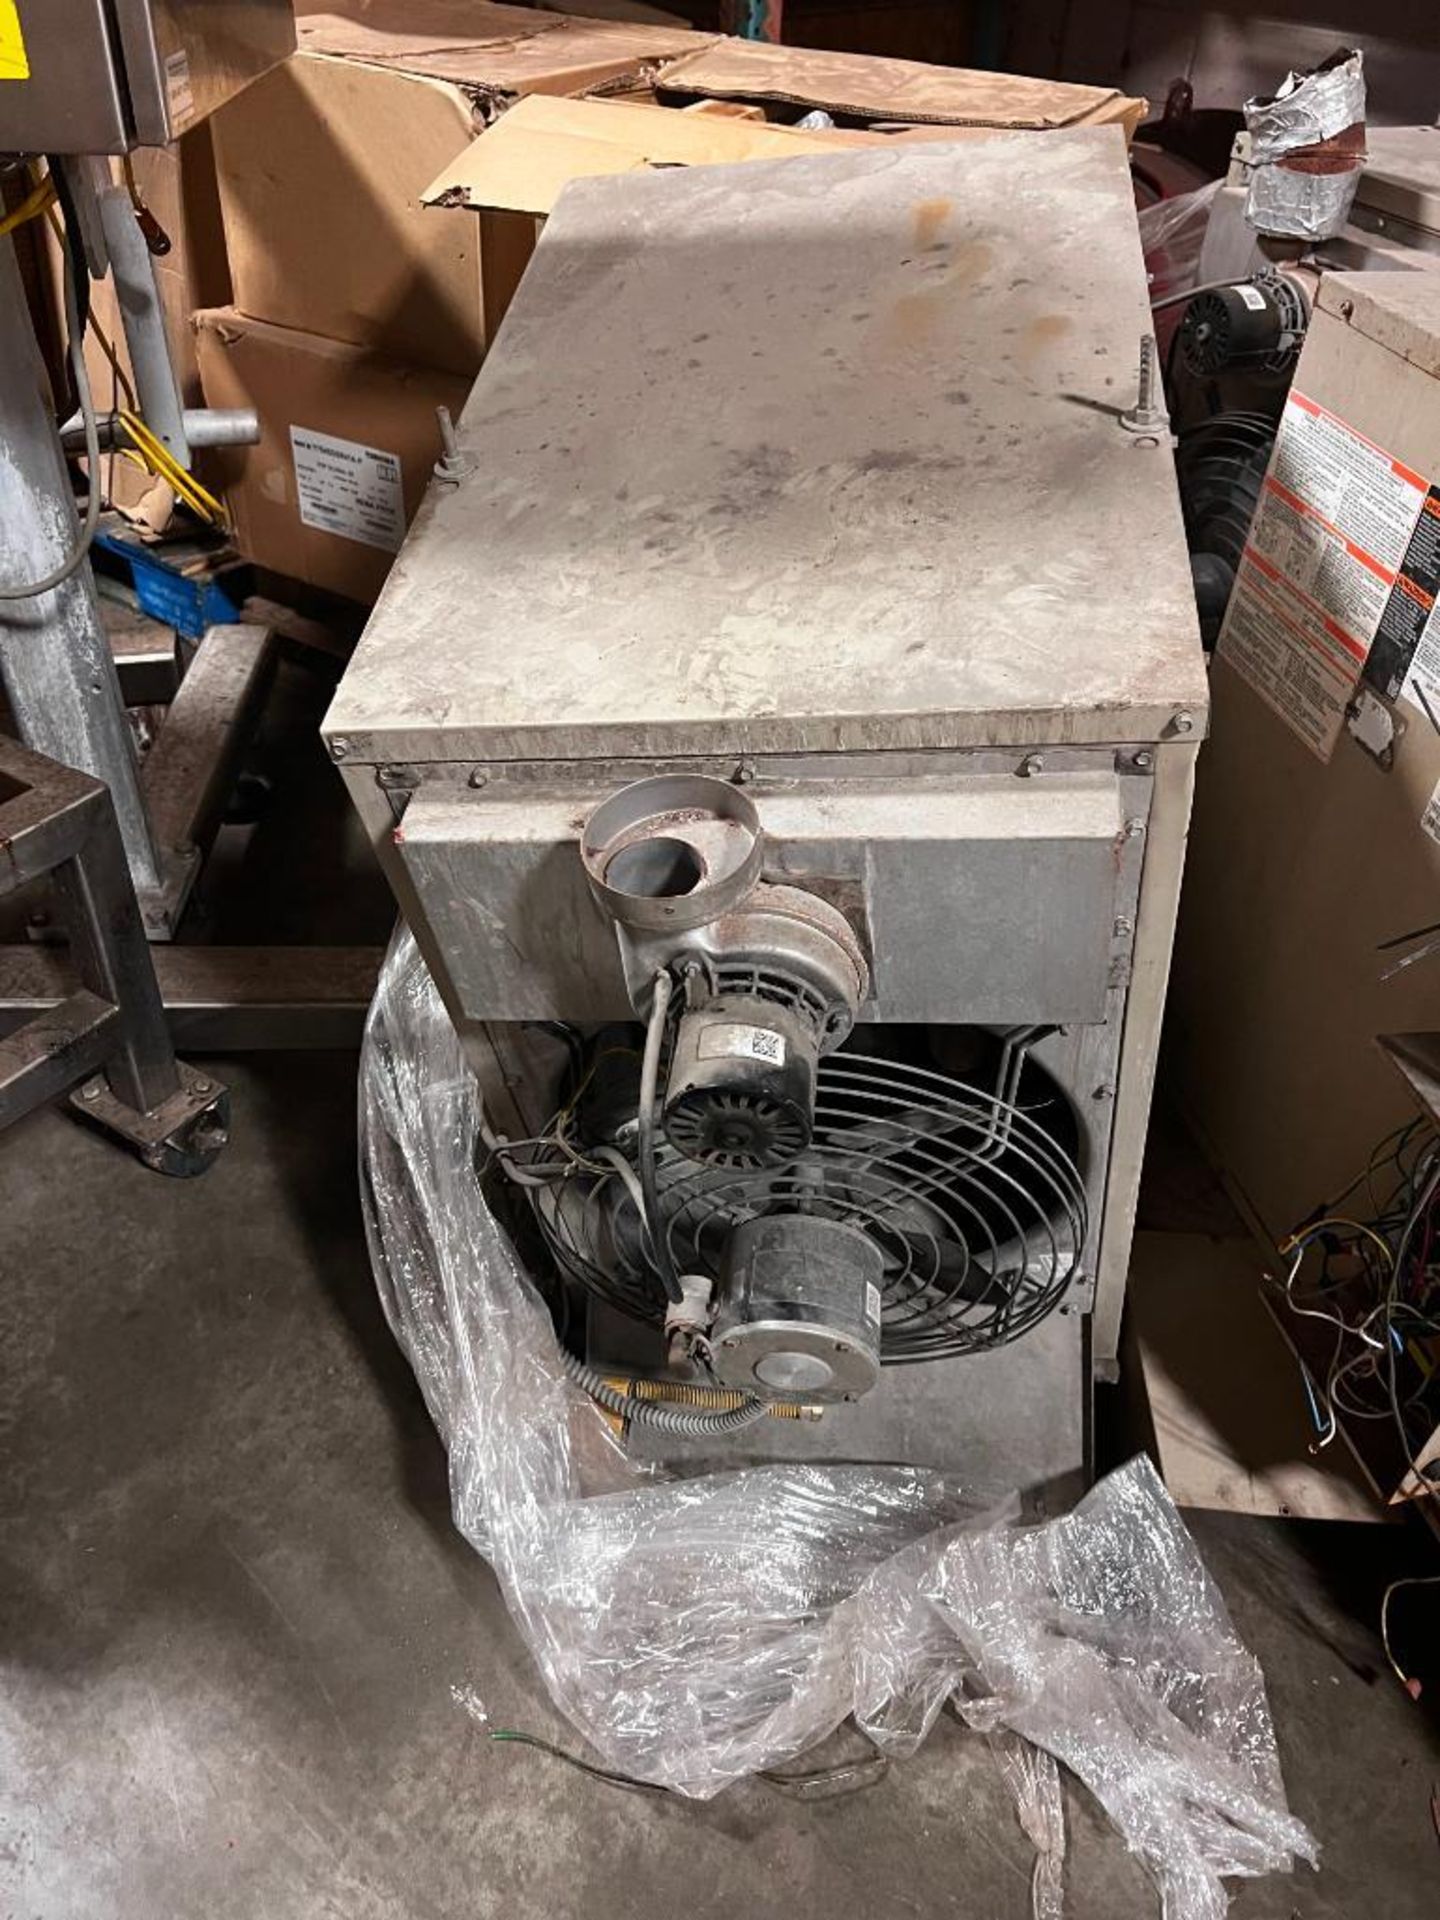 (3) Gas Heater, Model: SEP-145A-5 (Location: Chandler, OK) - Rigging Fee: Contact HDC